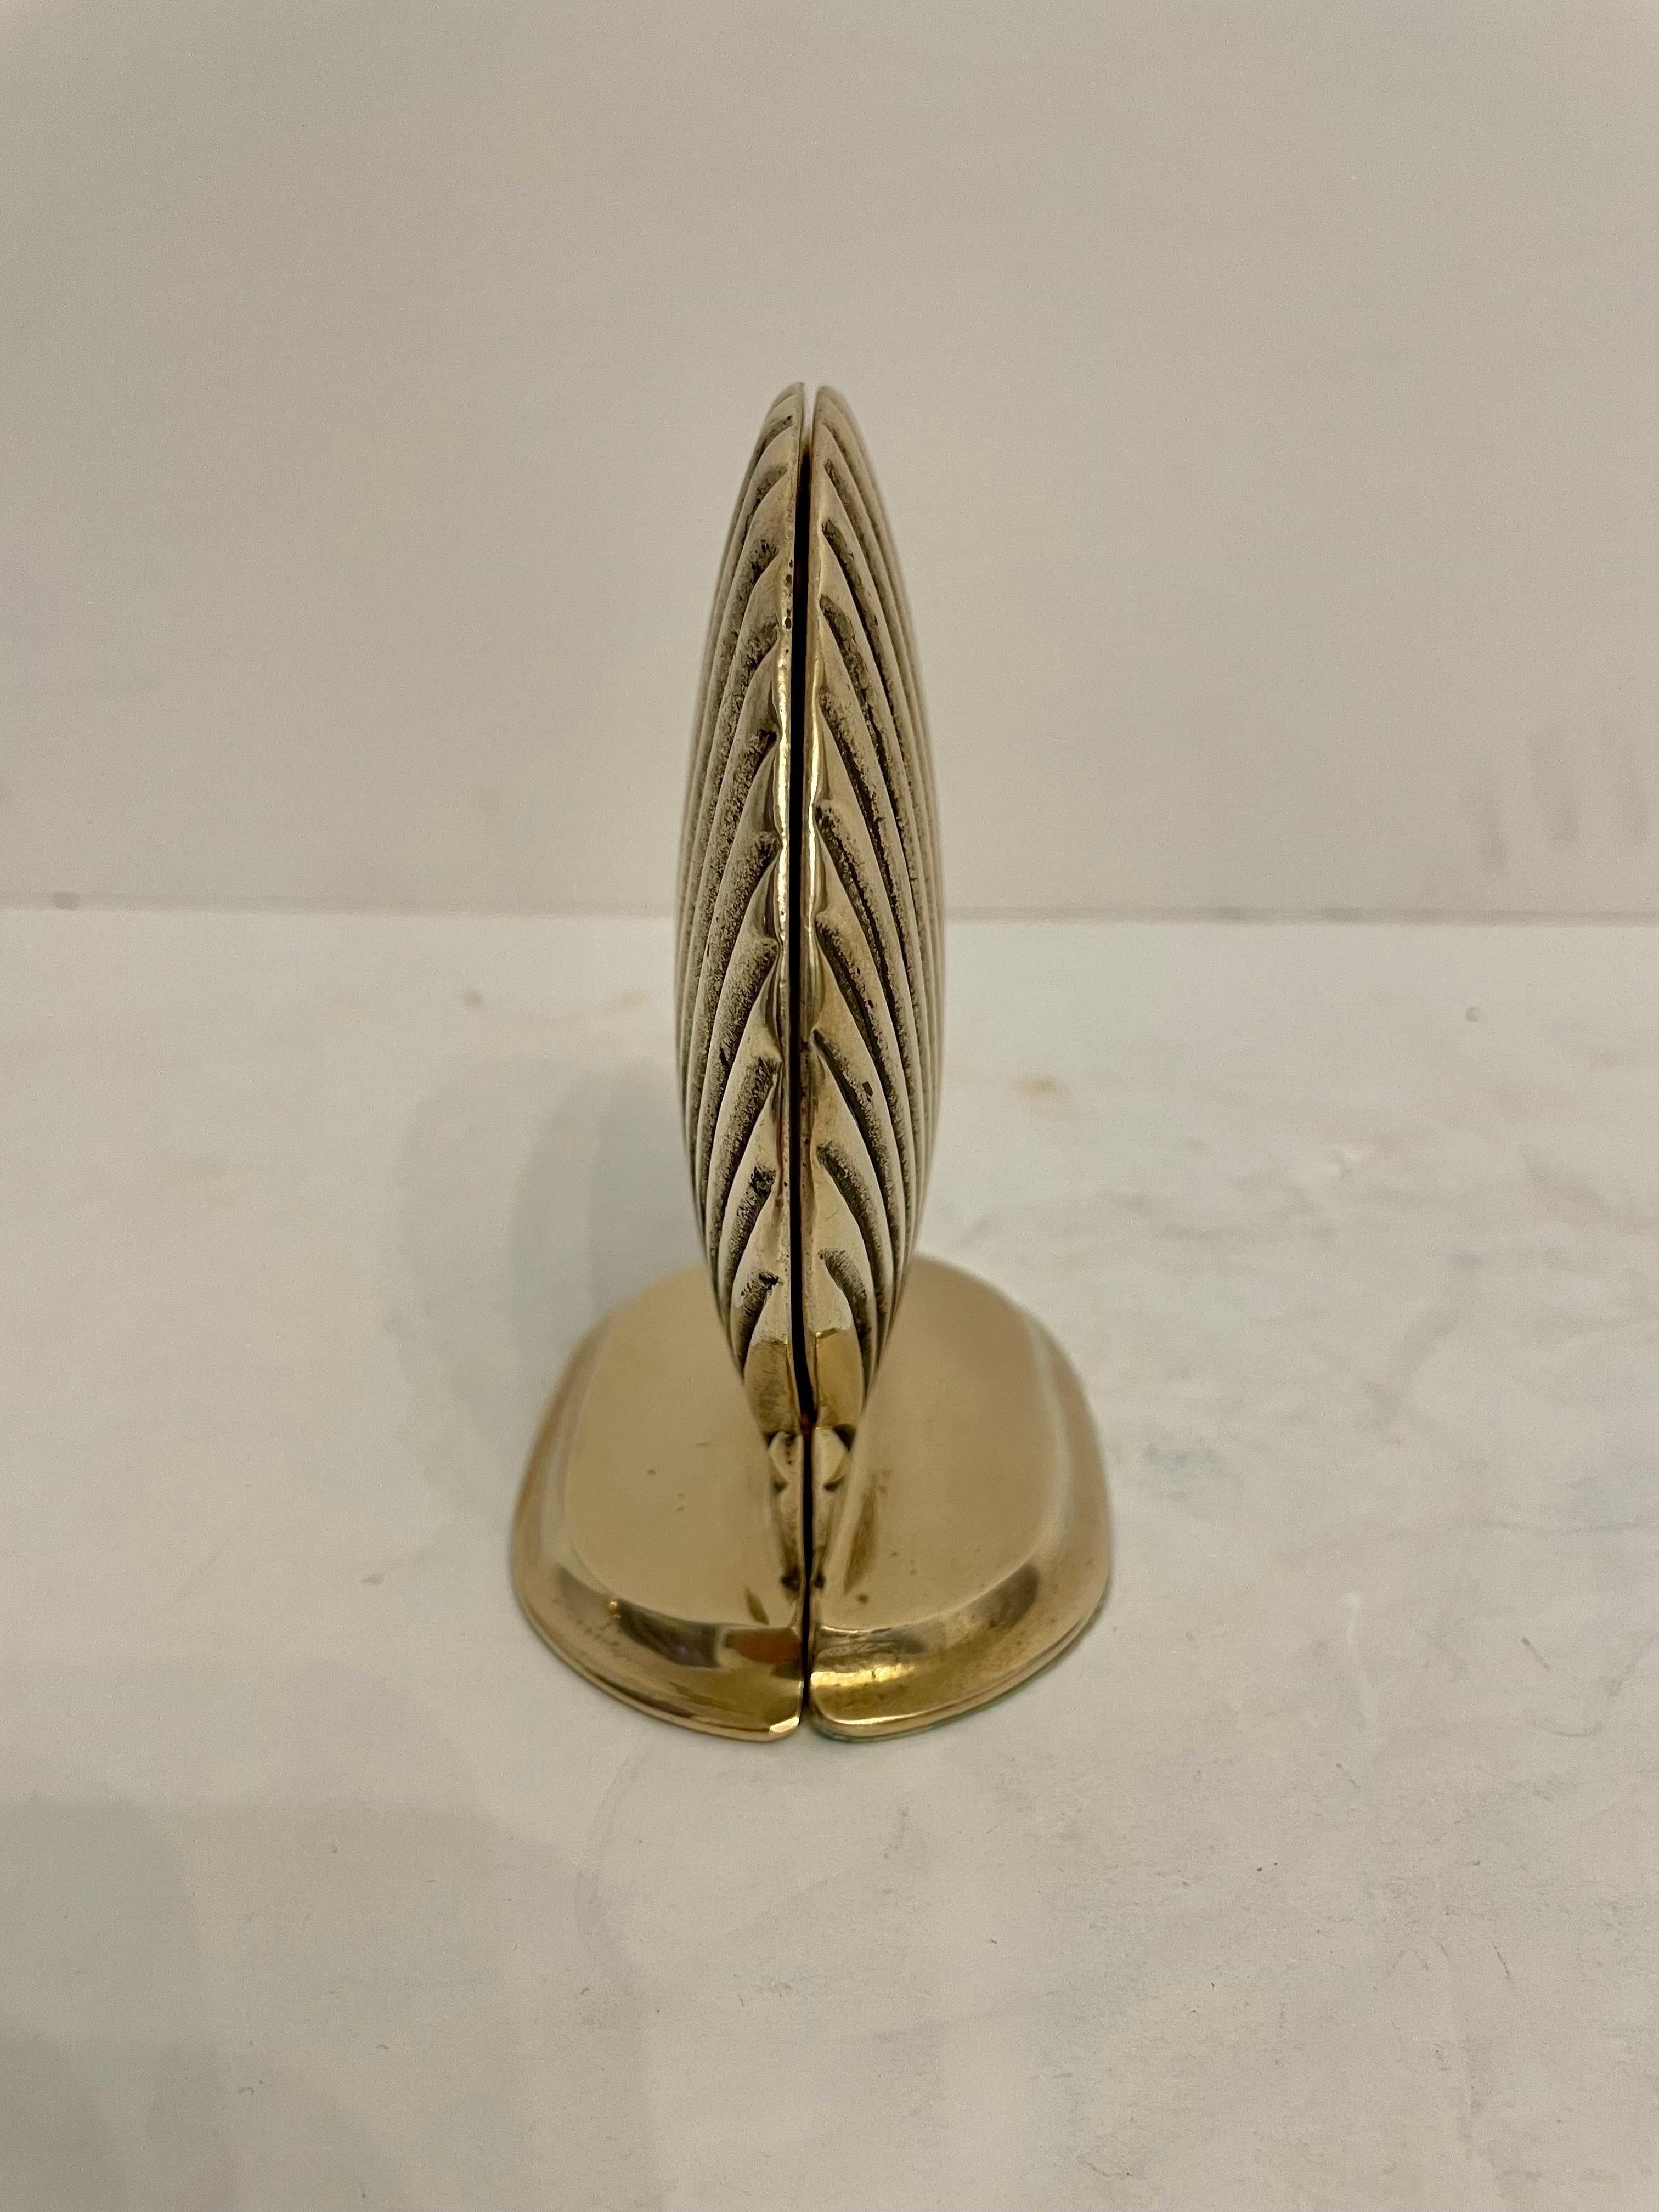 Cast Vintage Brass Clam Shell Seashell Bookends For Sale